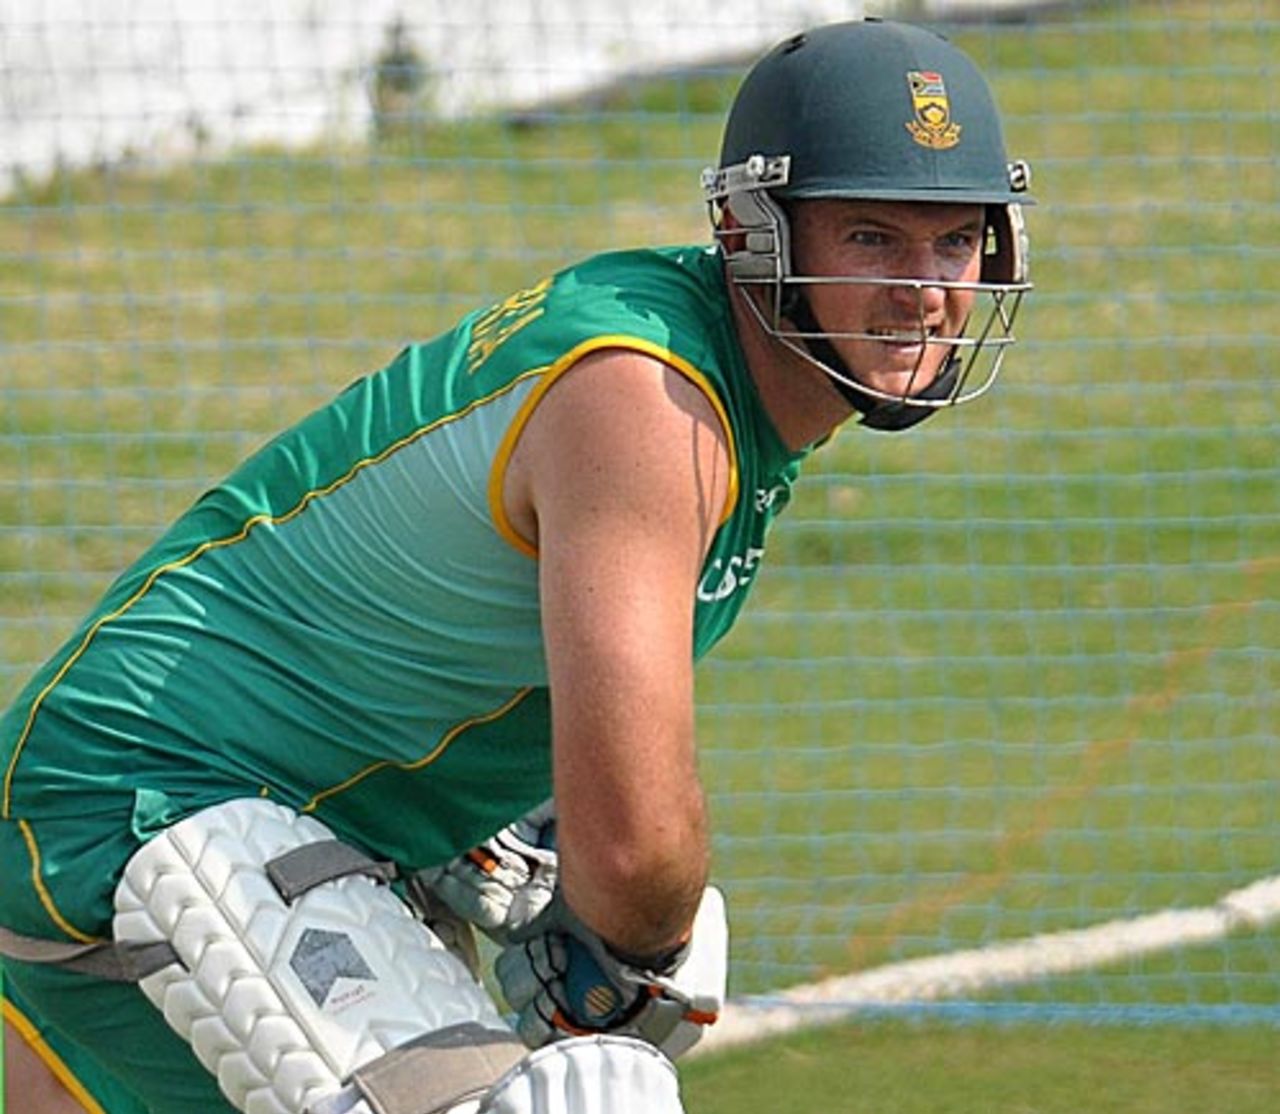 Graeme Smith bats during a practice session, Nagpur, February 1, 2010